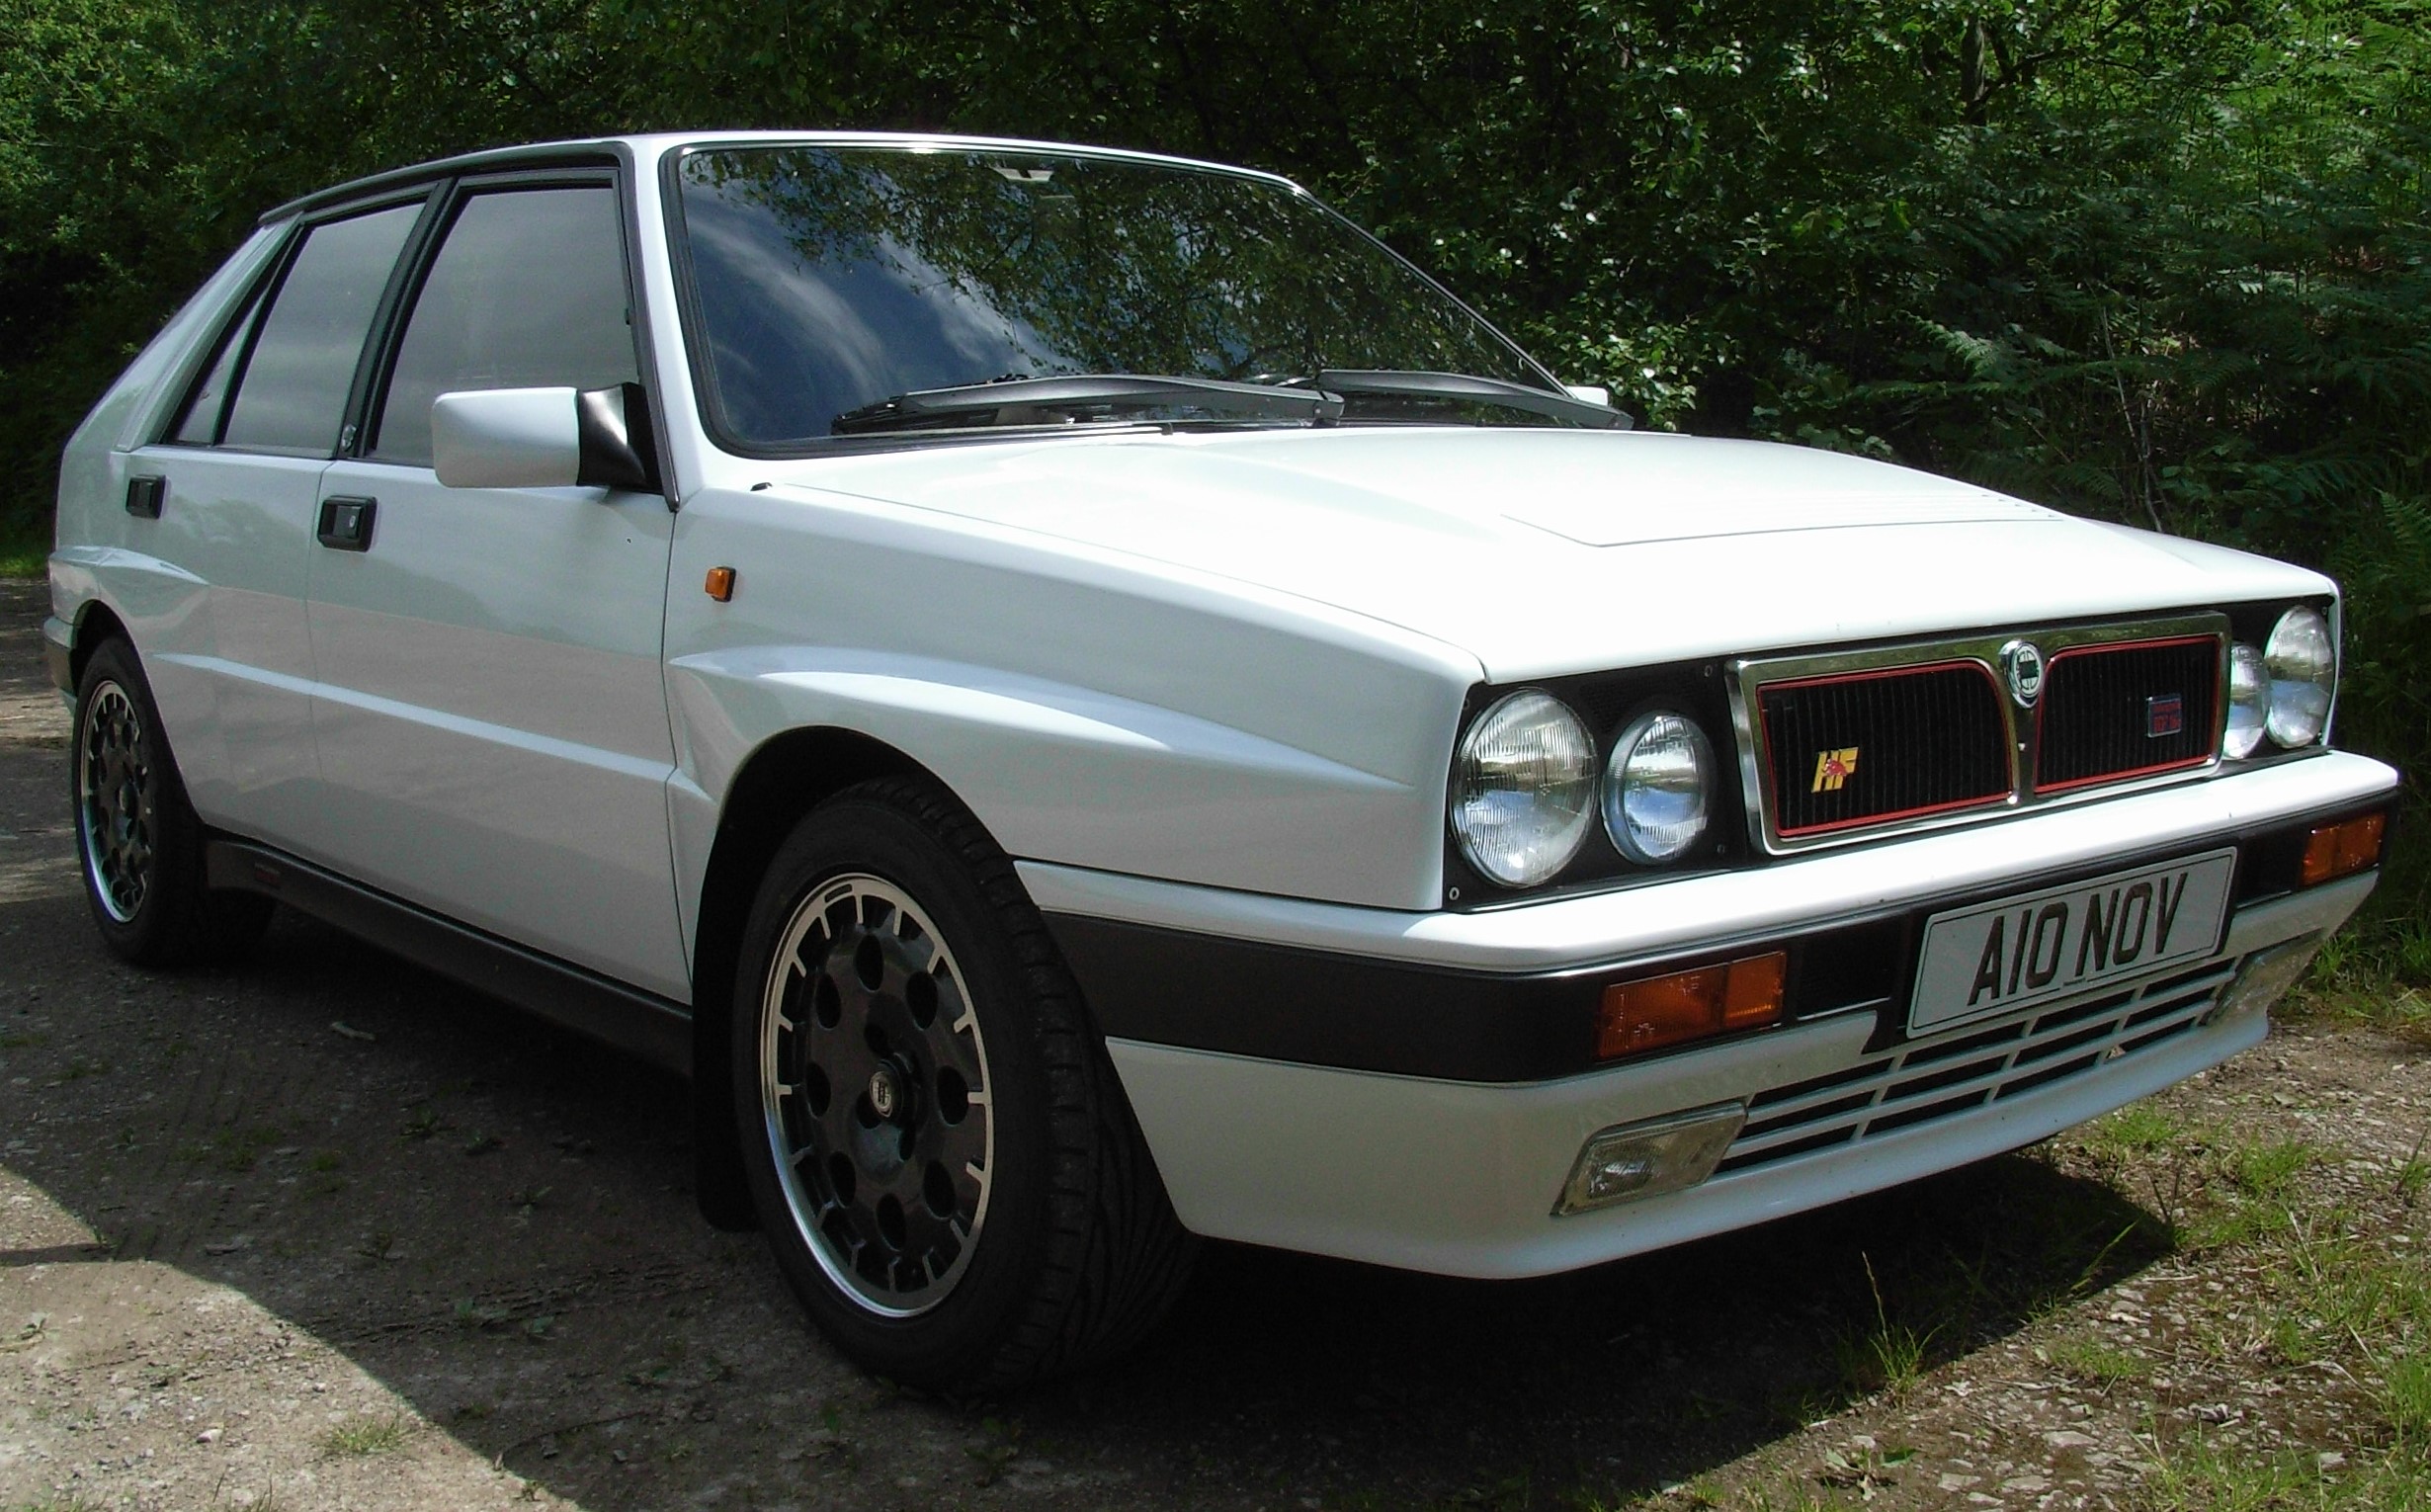 My Lancia Delta Integrale Project. - Page 11 - Readers' Cars - PistonHeads